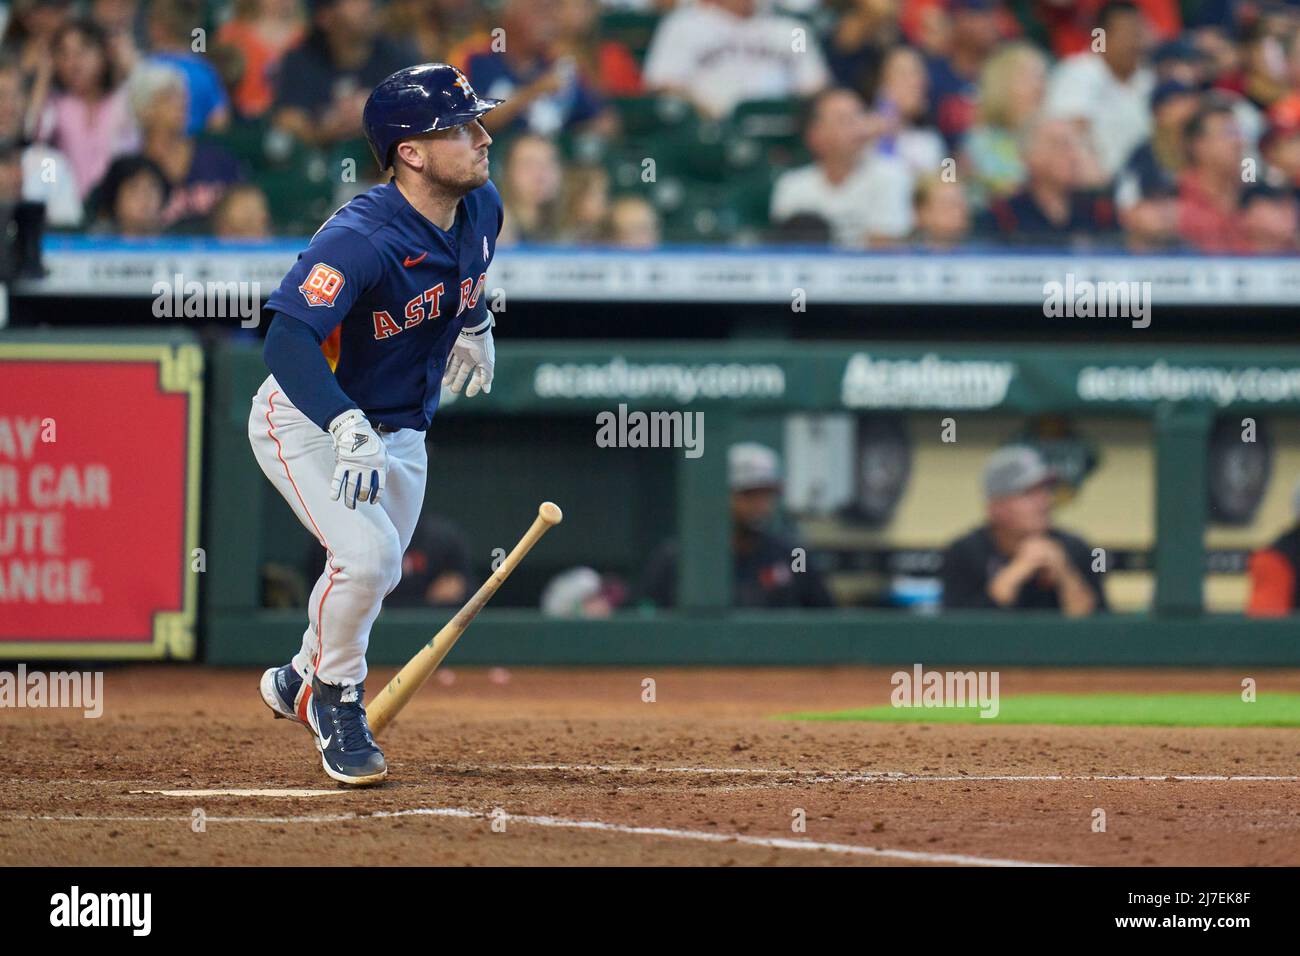 Houston Tx. 08/05/2022, May 8 2022: Houston third baseman Alex Bergman (2) this a homer during the game with Detroit Tigers and Houston Astros held at Minute Maid Park in Houston Tx. David Seelig/Cal Sport Medi Stock Photo